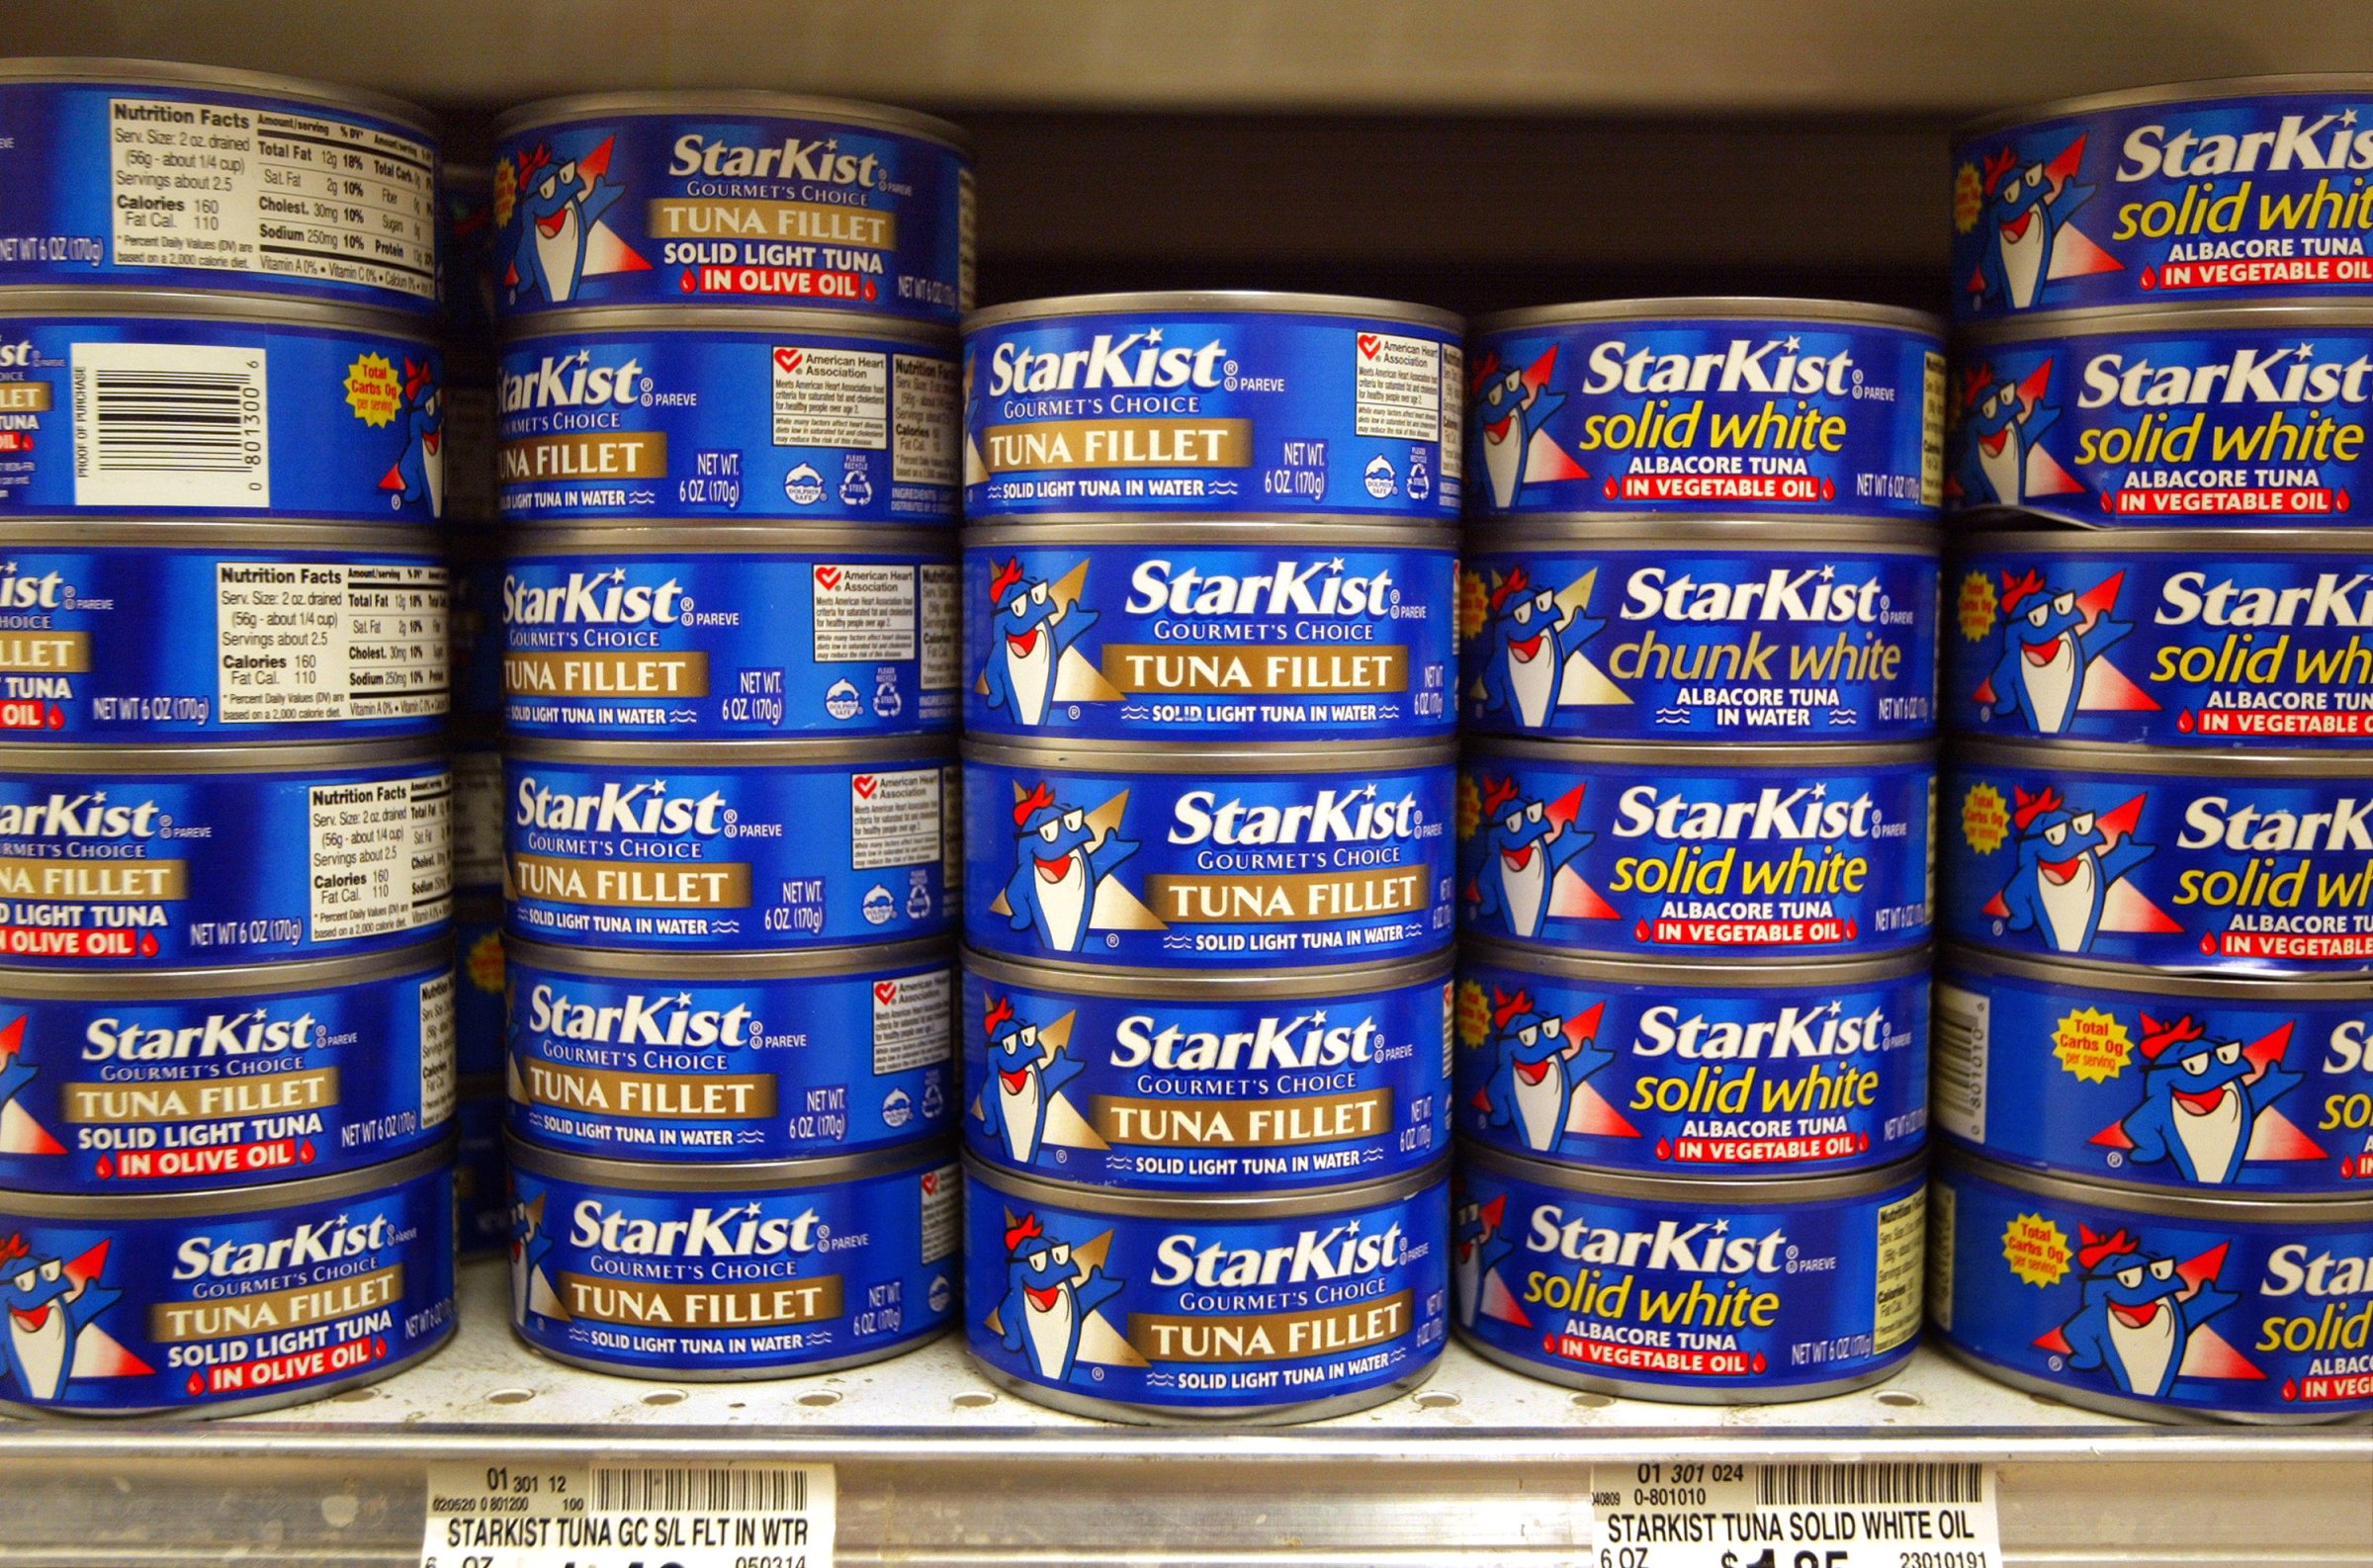 Standards For "Dolphin-Safe" Tuna Label Upheld In Federal Court